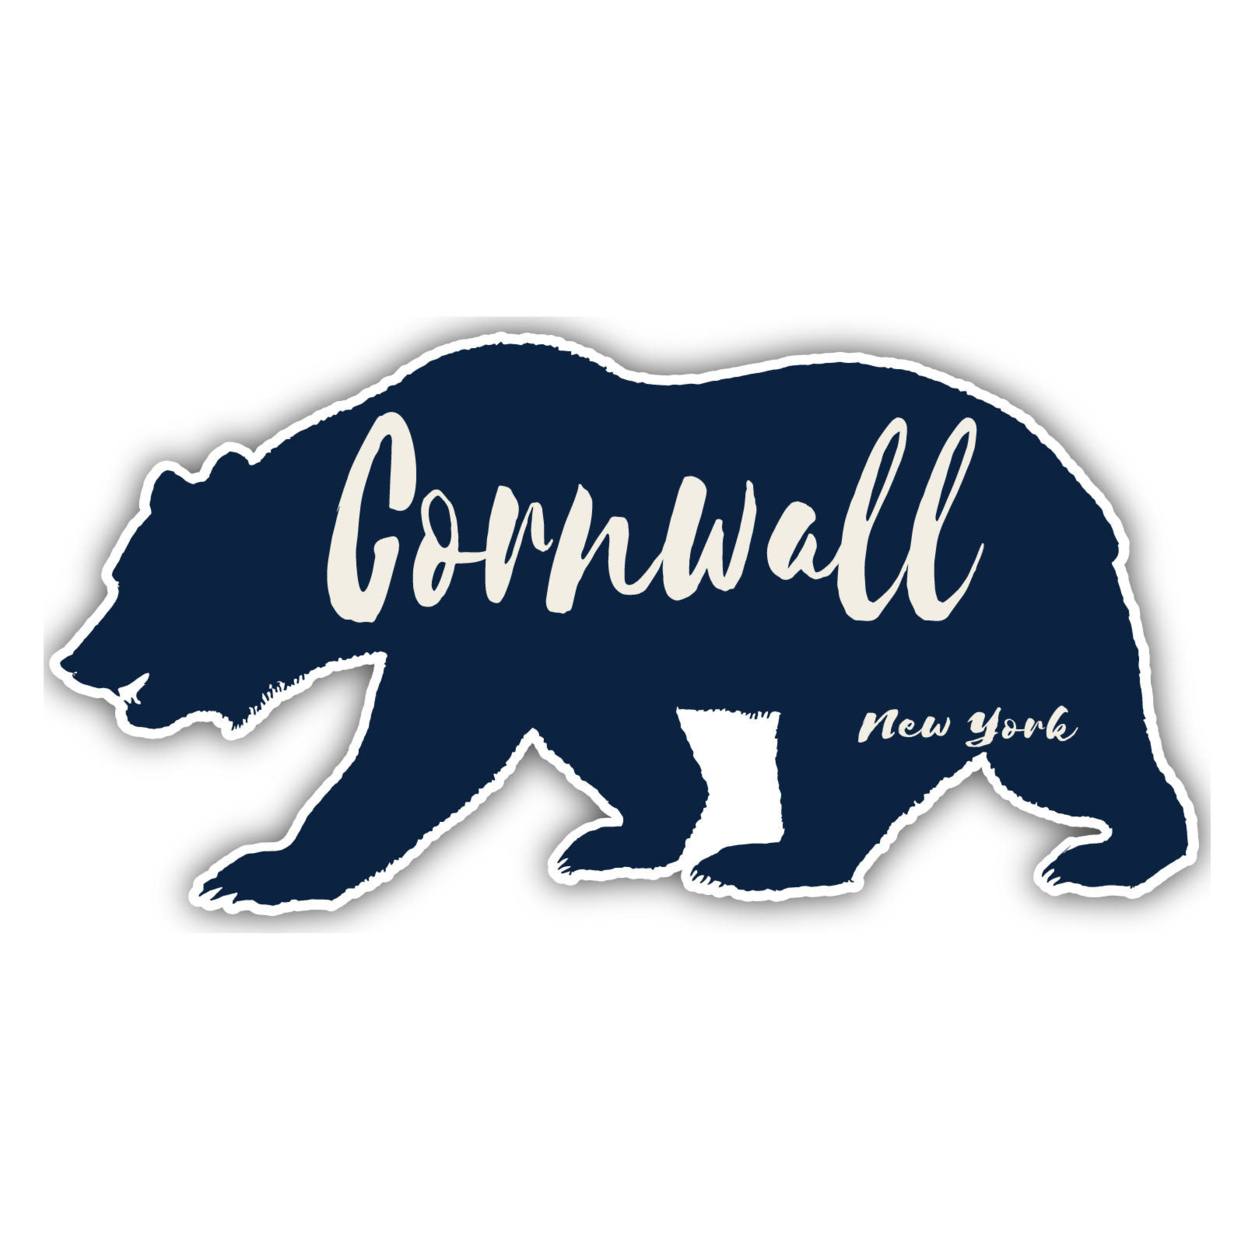 Cornwall New York Souvenir Decorative Stickers (Choose Theme And Size) - 4-Pack, 10-Inch, Bear